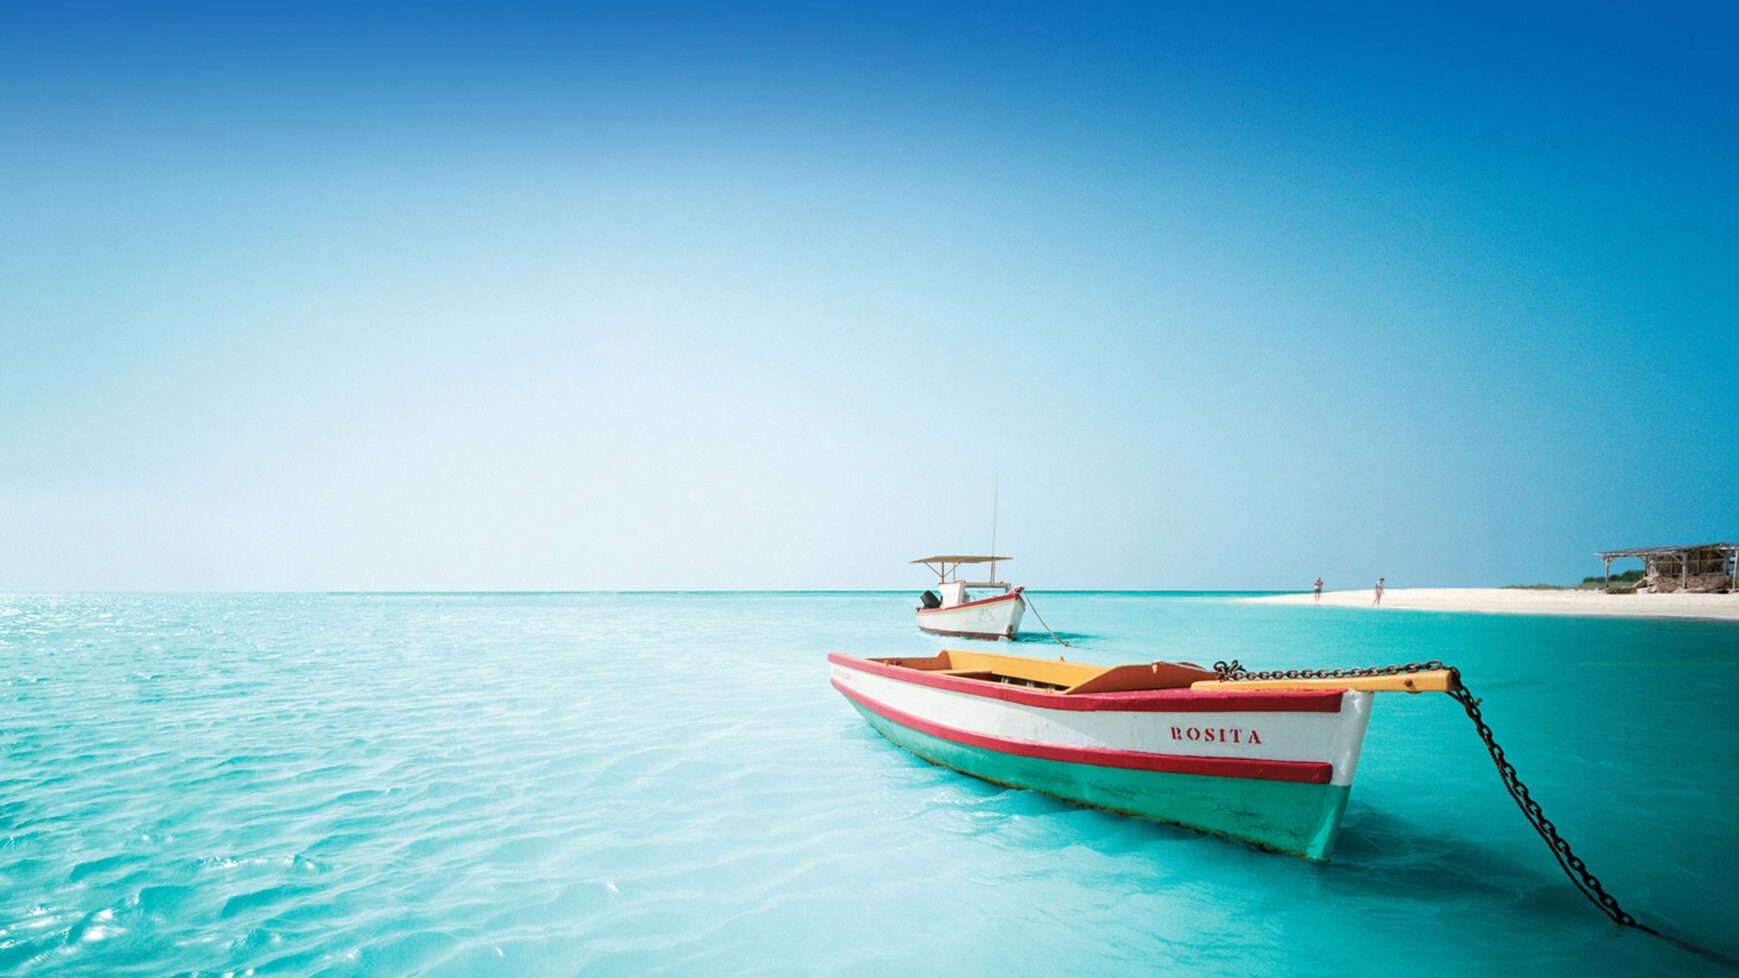 Serene tropical shoreline with clear blue water and a colorful boat in the foreground